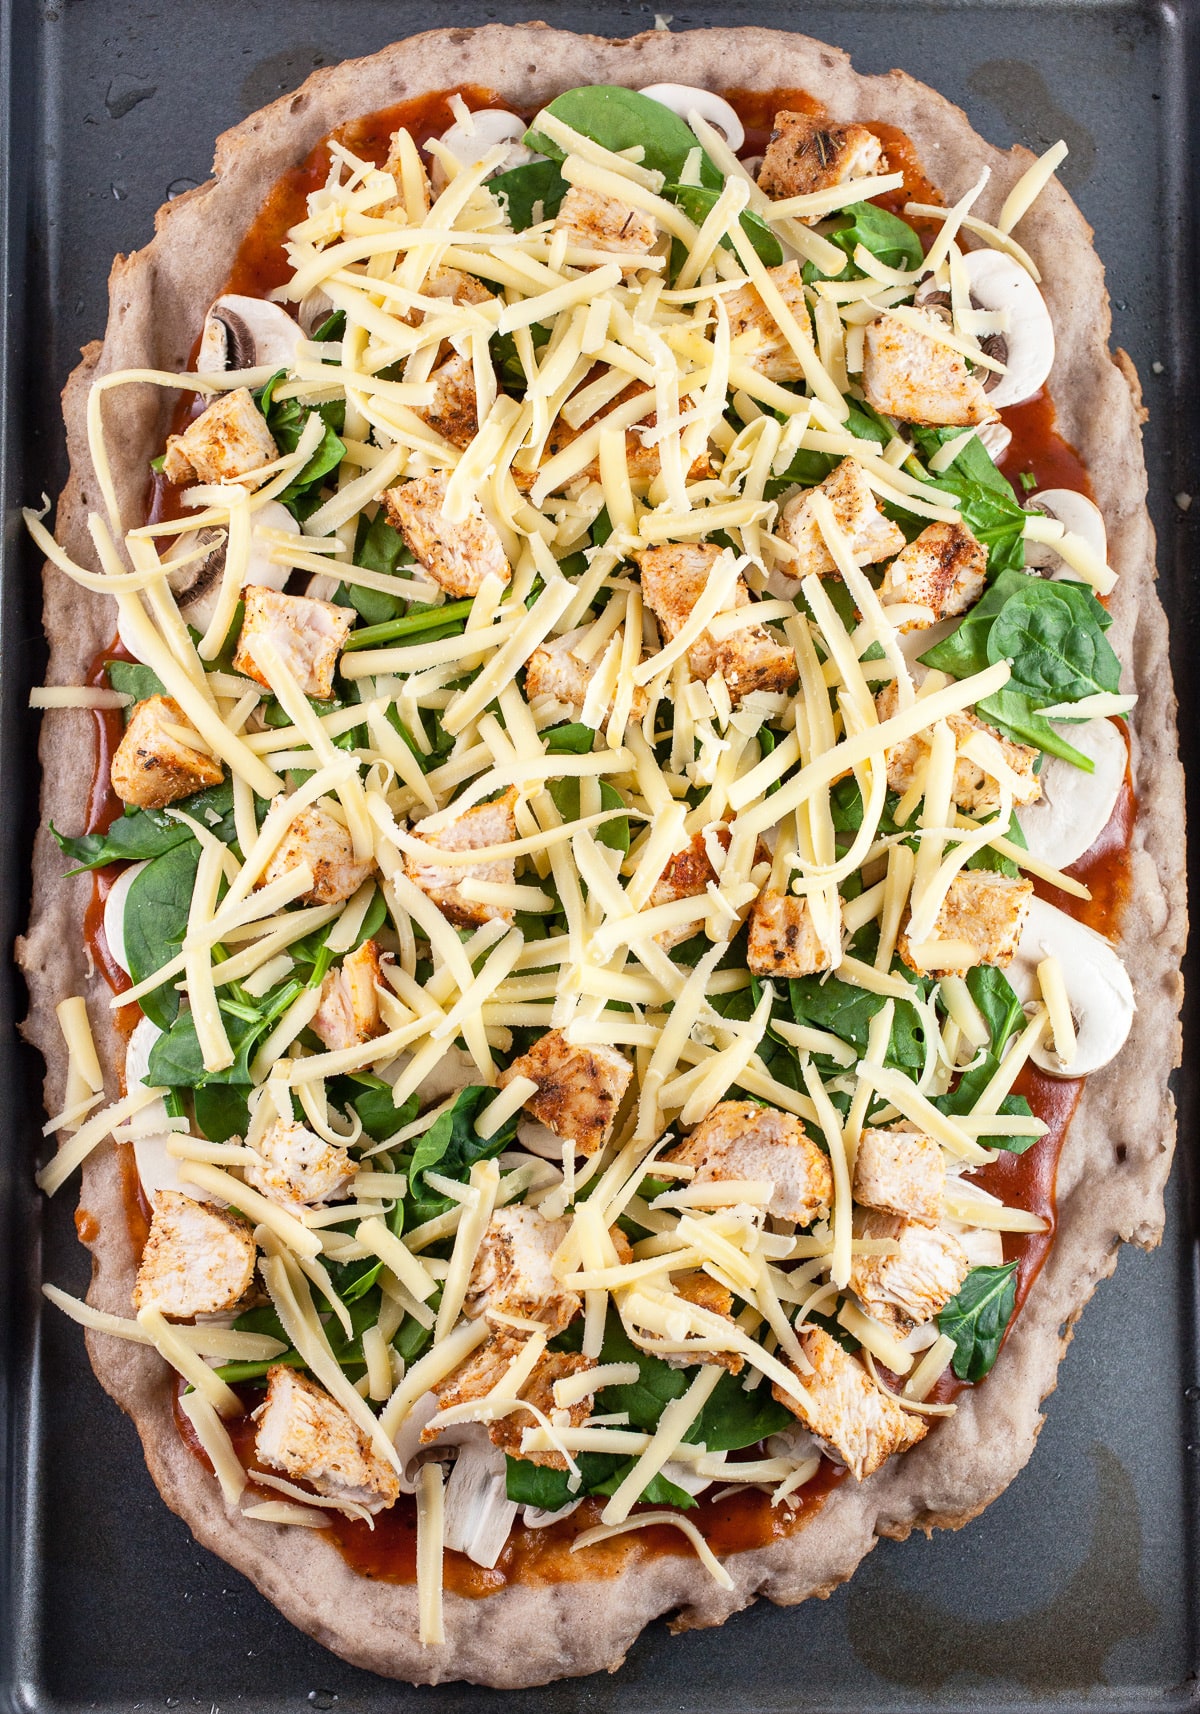 Pizza crust with BBQ sauce, mushrooms, spinach, and shredded cheese on baking sheet.